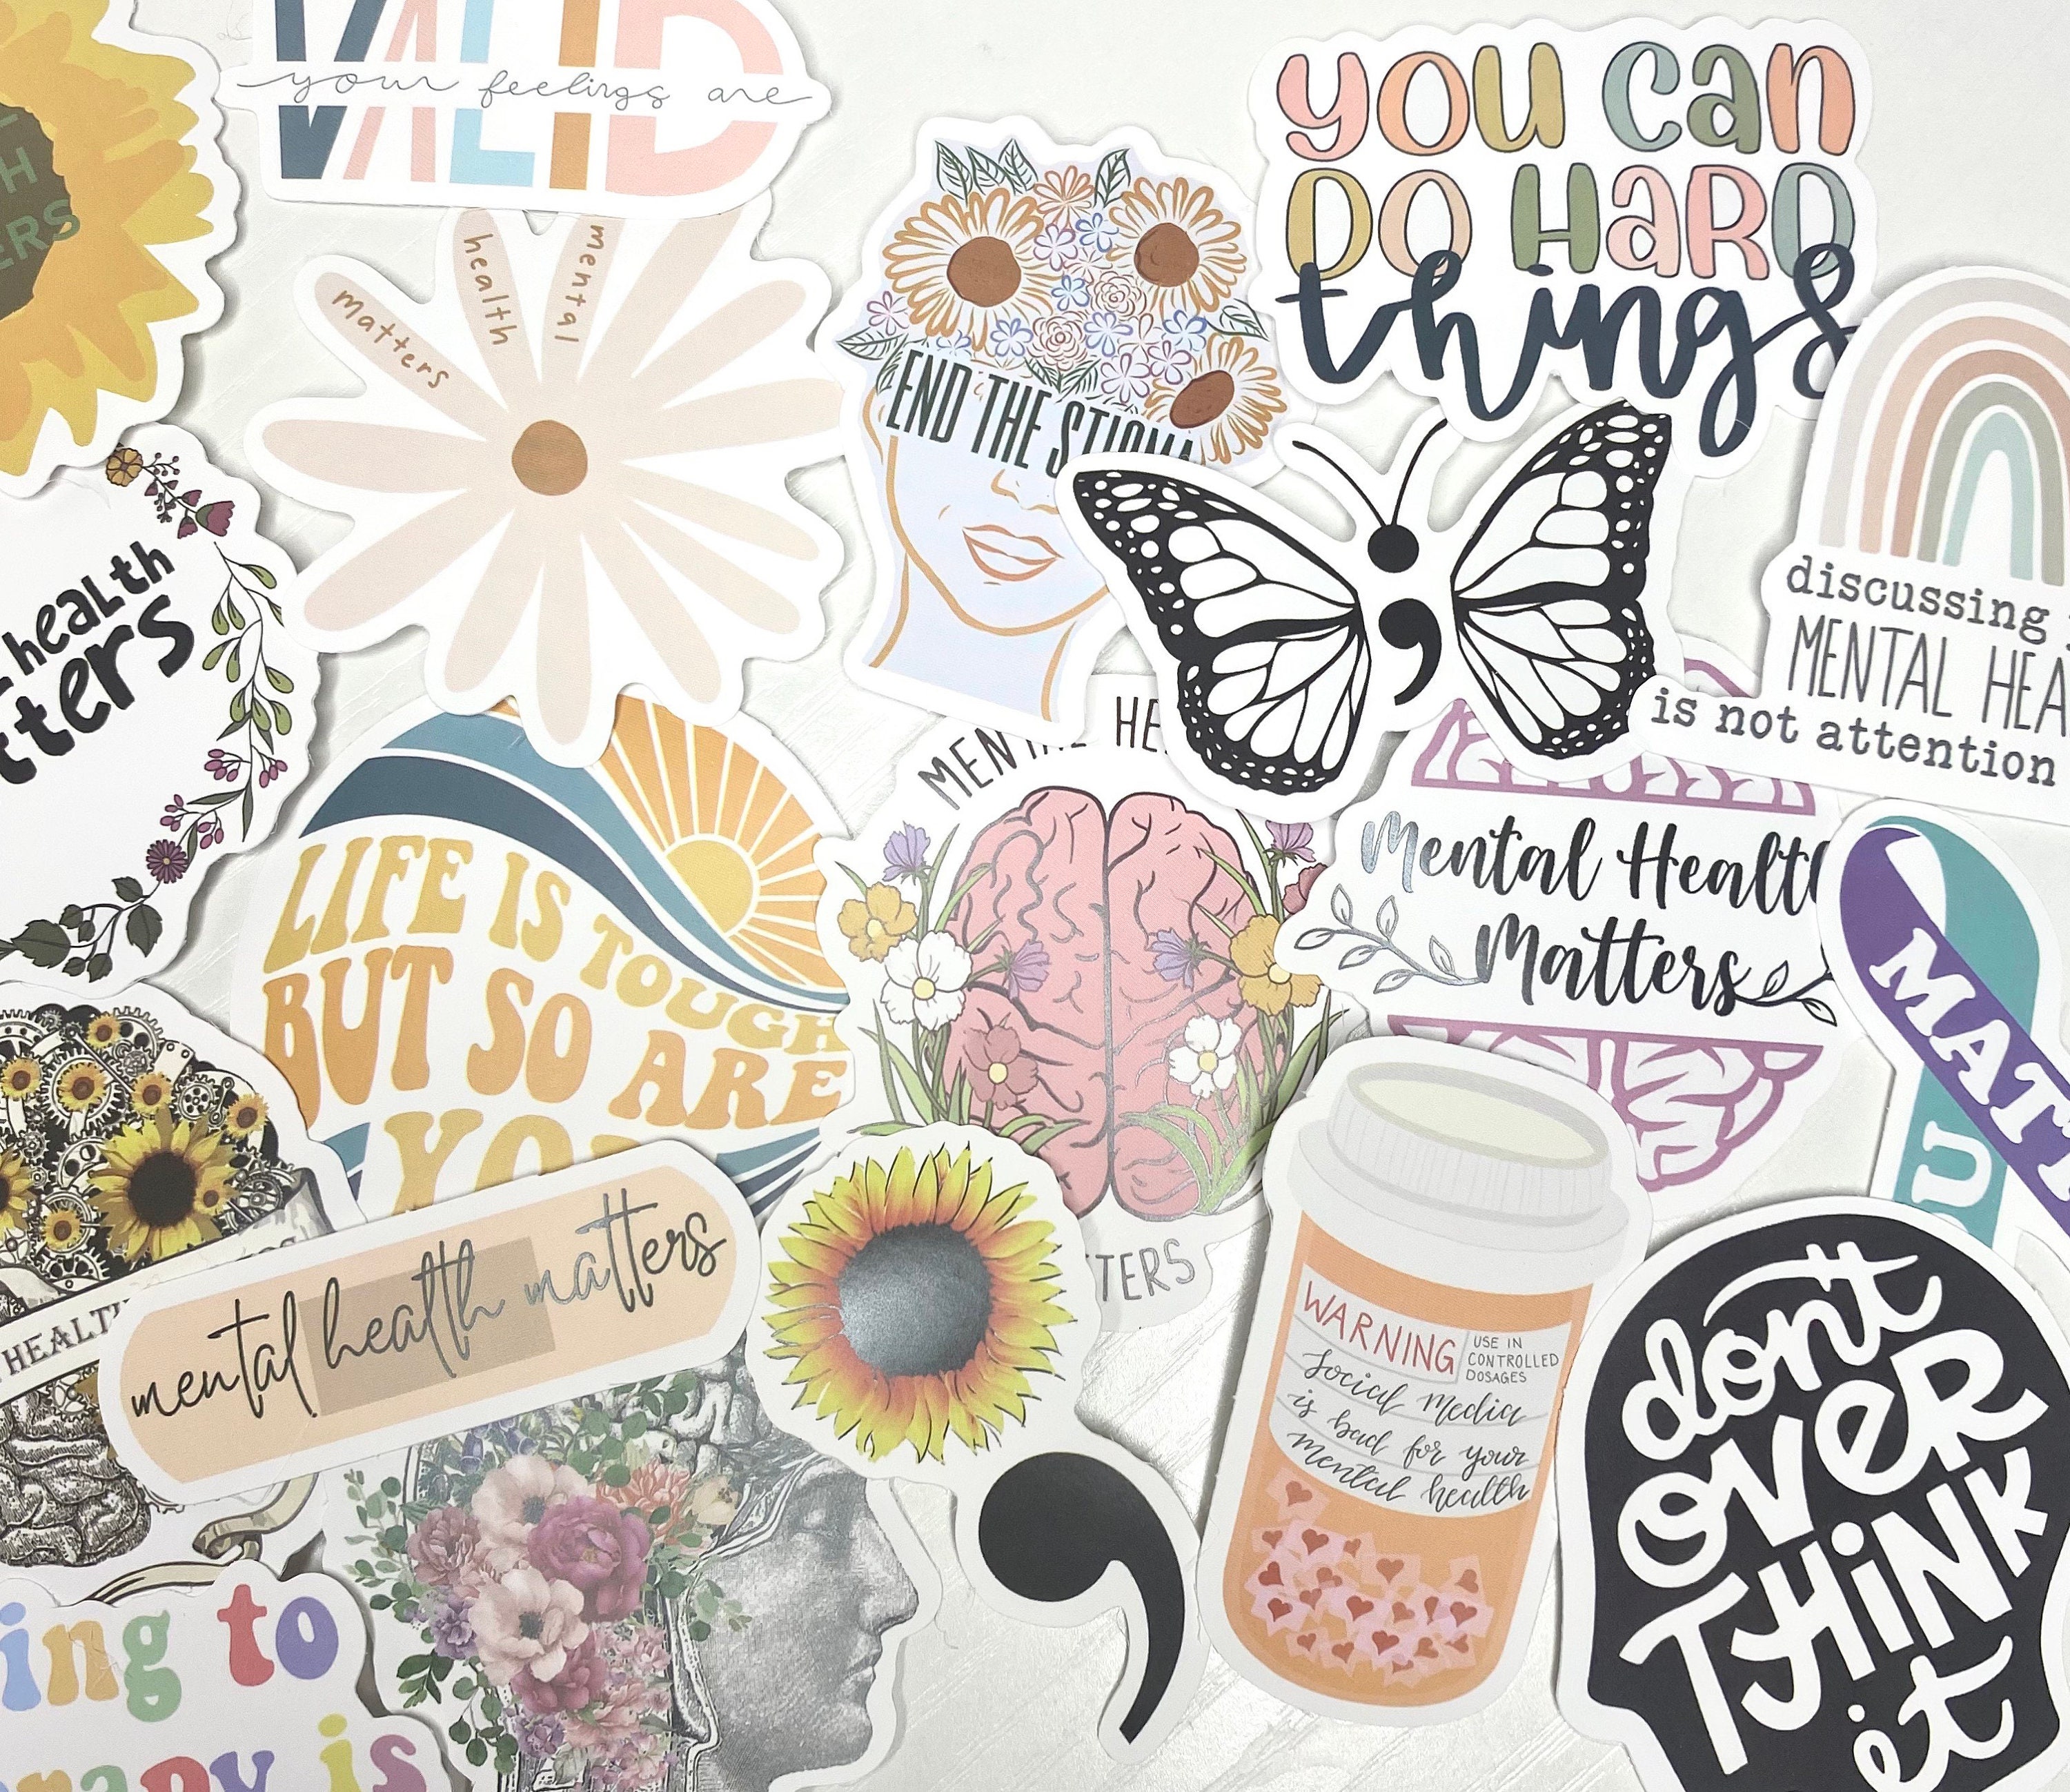 Warning-overthinking in Progress, Funny Stickers, Waterproof Stickers for  Water Bottle, Small Stickers for Phones, Cute Stickers for Laptop 